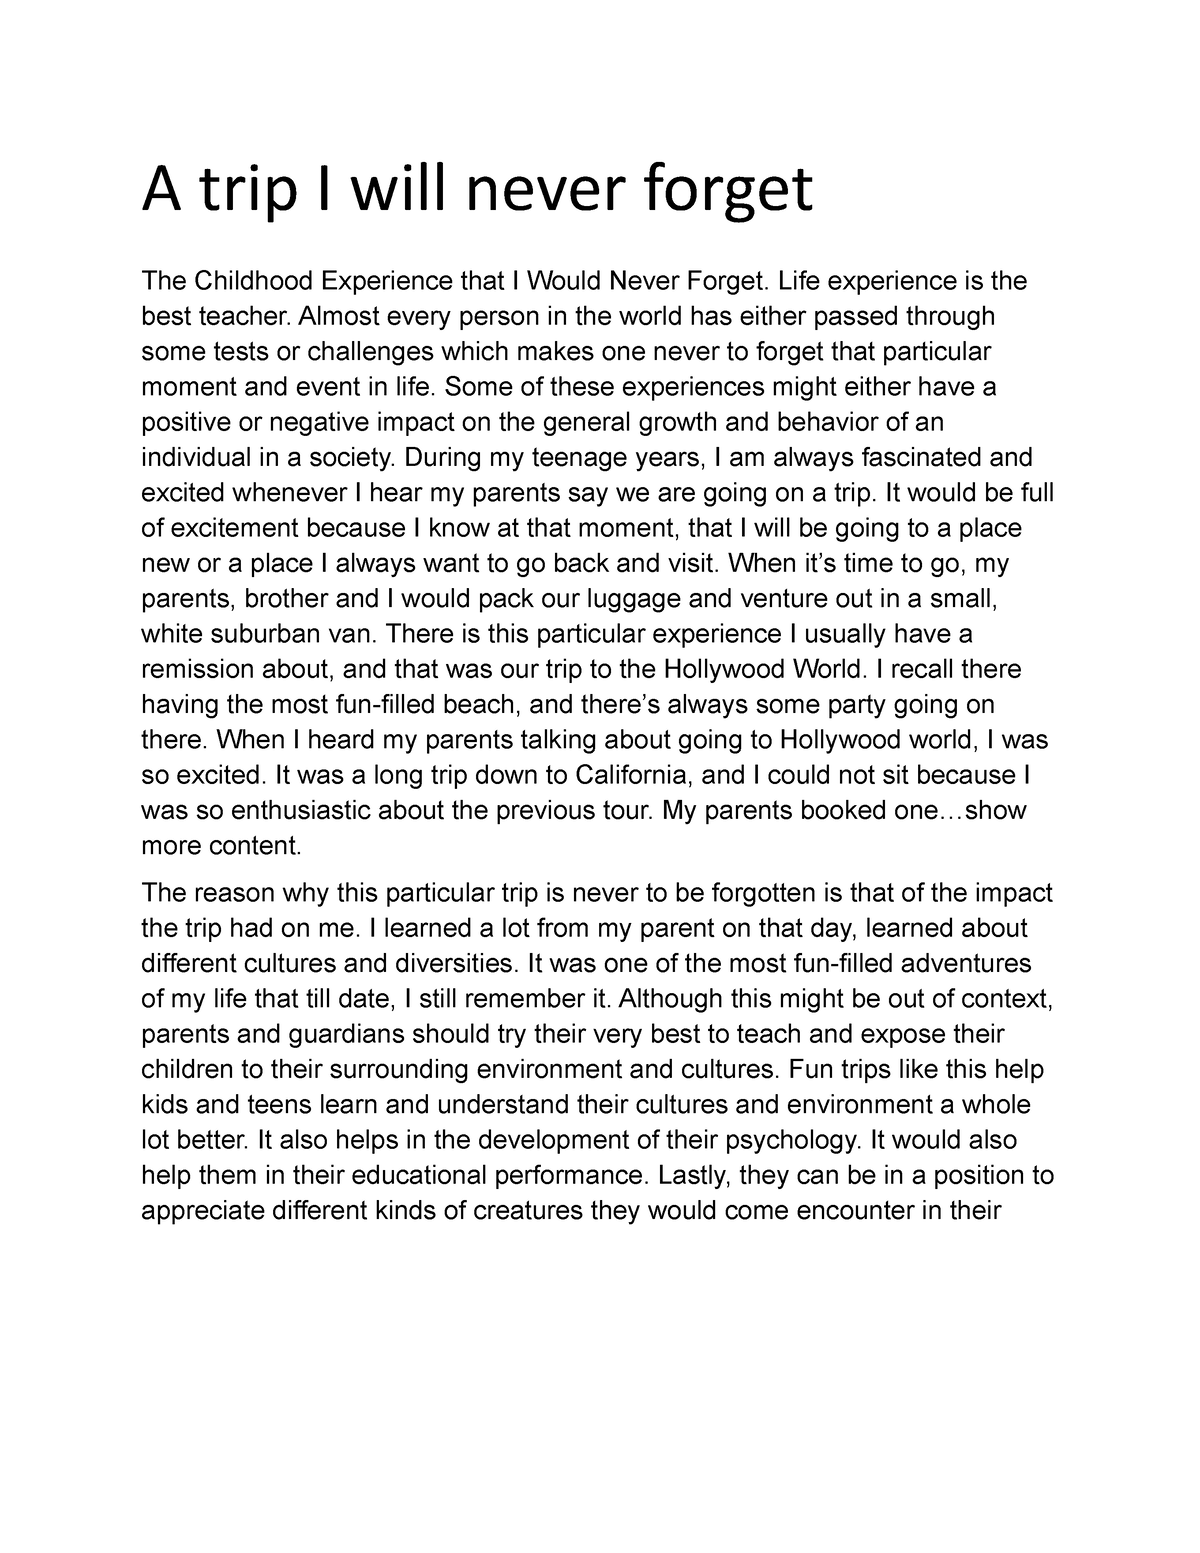 a trip you will never forget essay 500 words